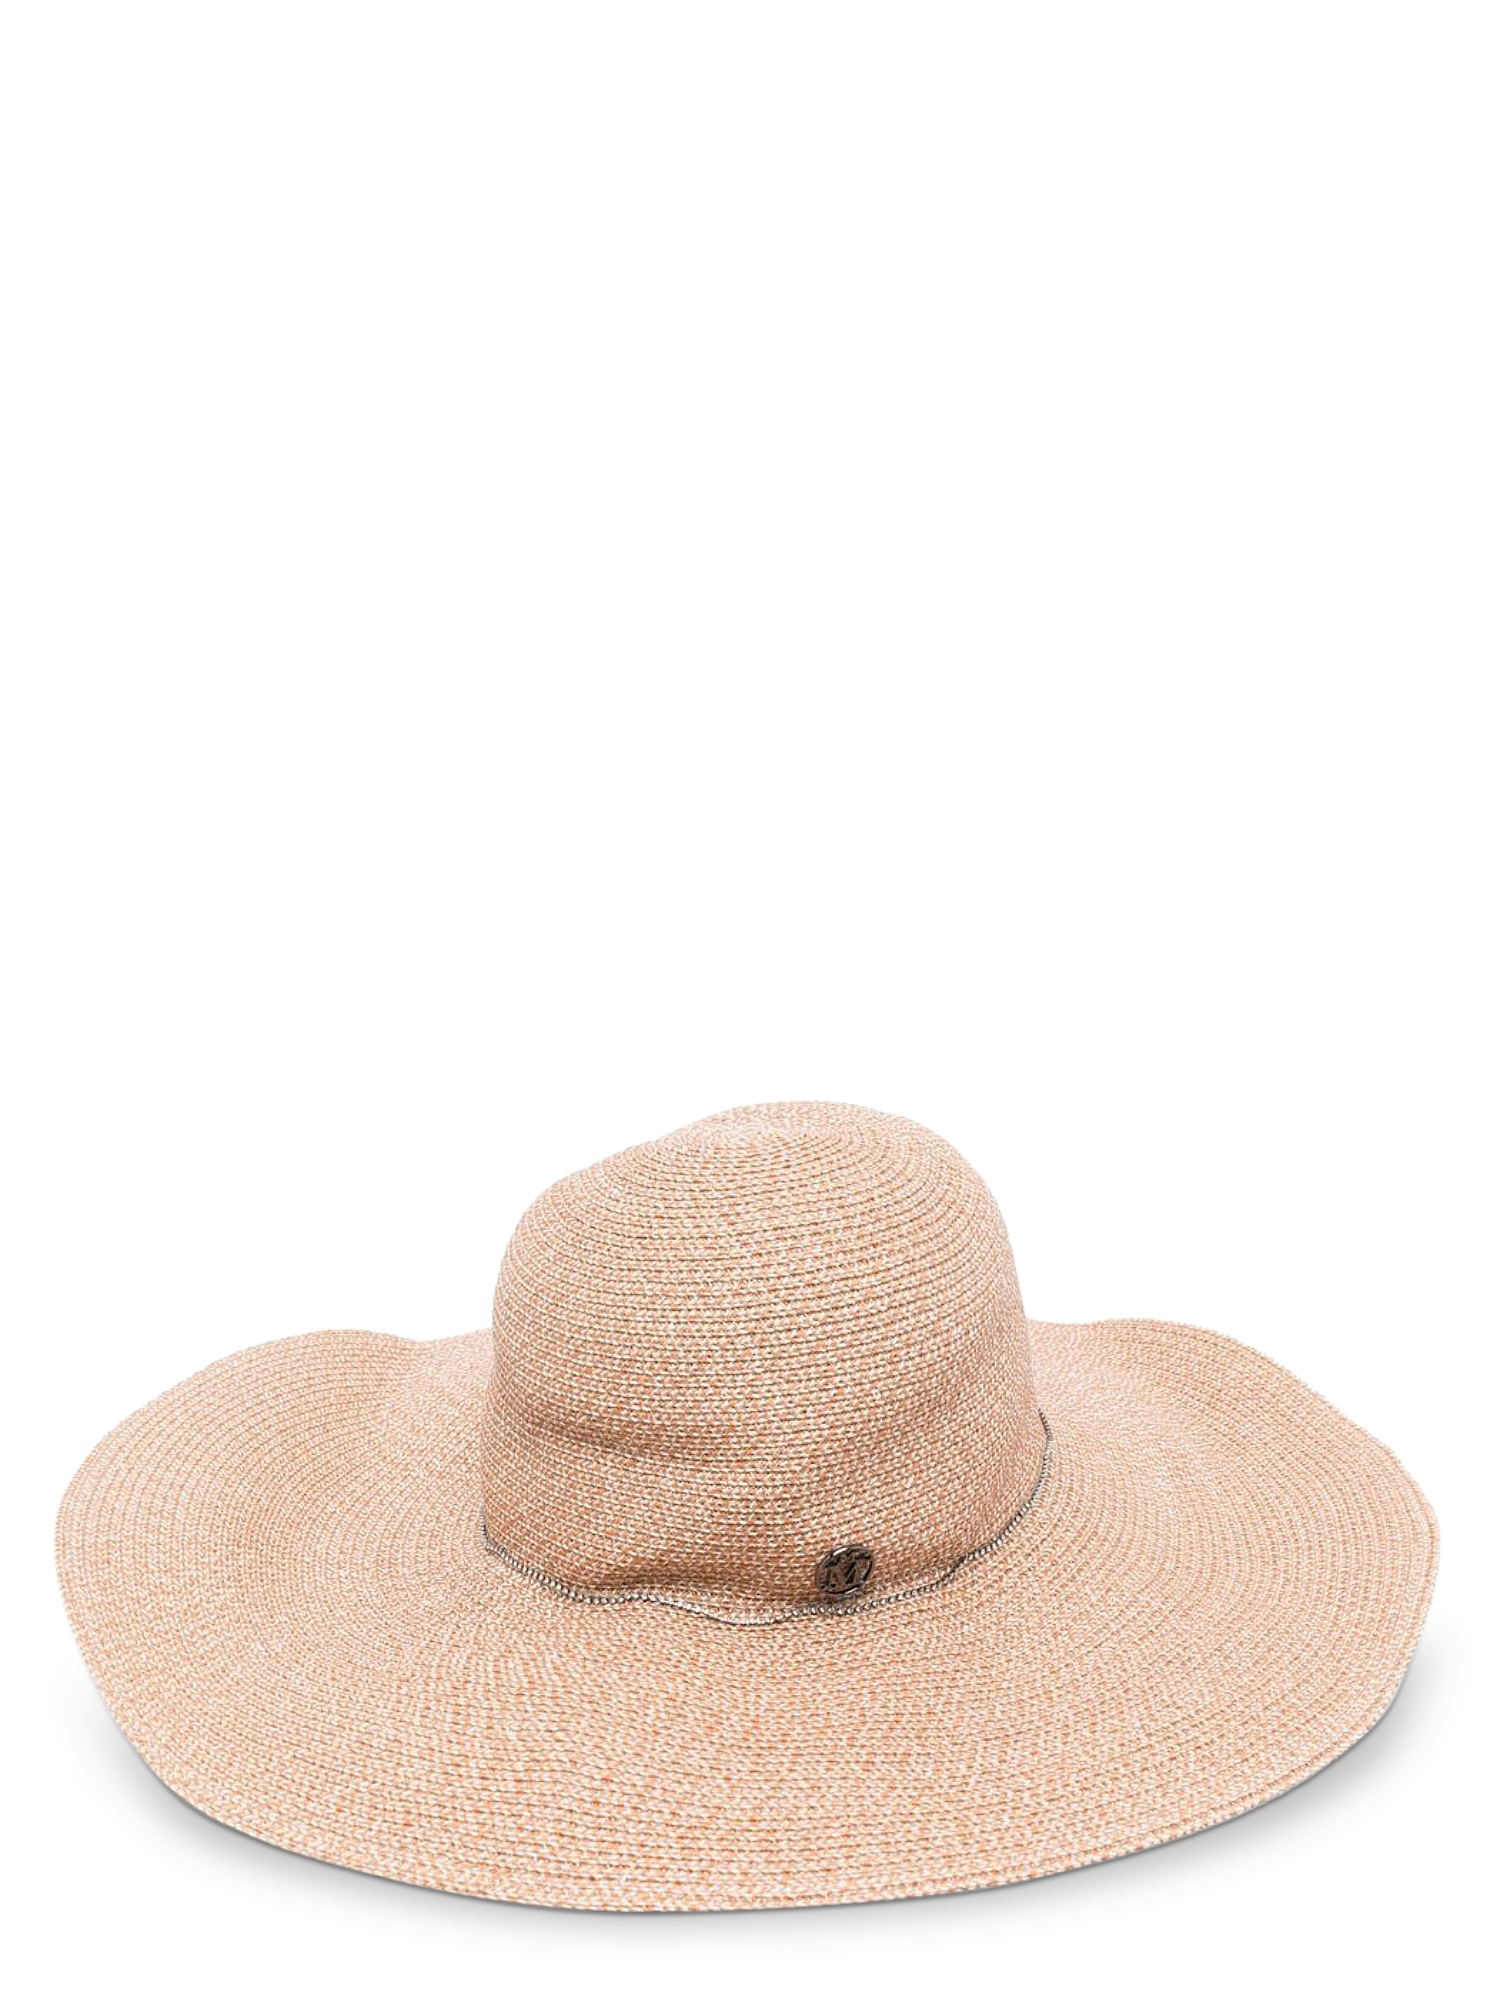 Condition: New With Tag, logo-plaque straw capeline hat from MAISON MICHEL featuring beige, interwoven design, silver-tone logo plaque, chain-link detailing, wide brim and hemp straw.